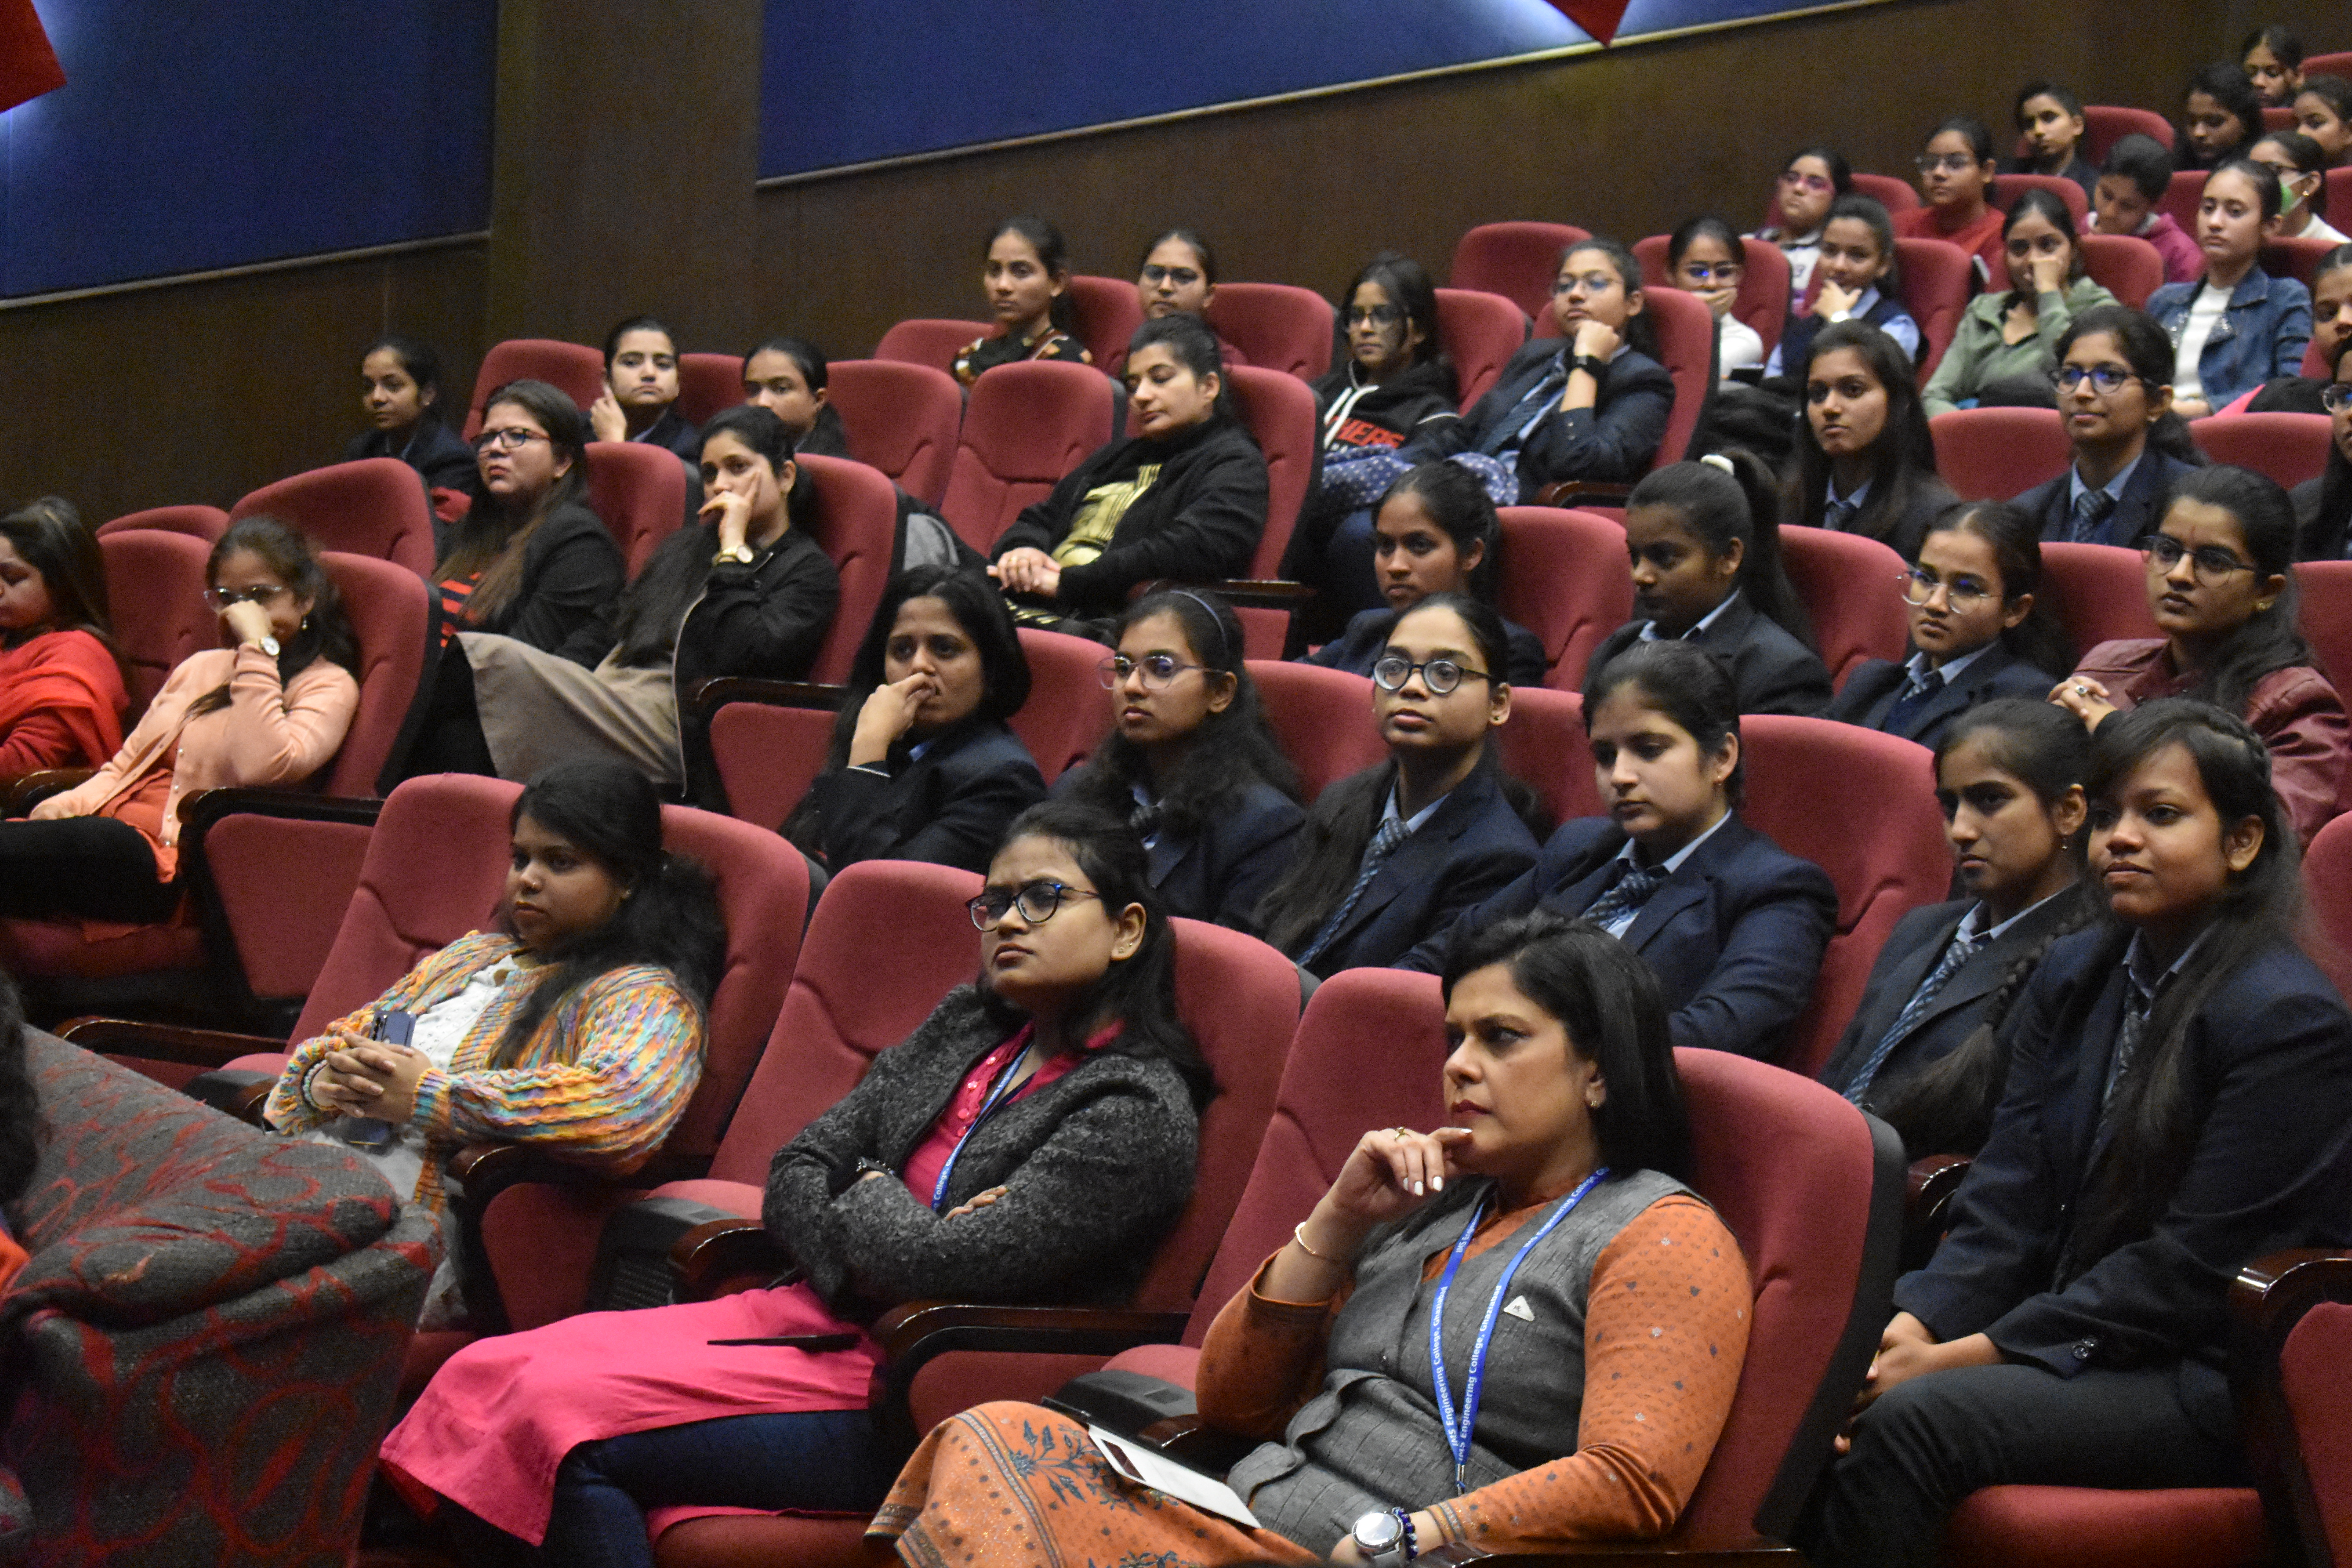 Awareness Programme on Provisions of Implementation of Sexual Harassment of Women